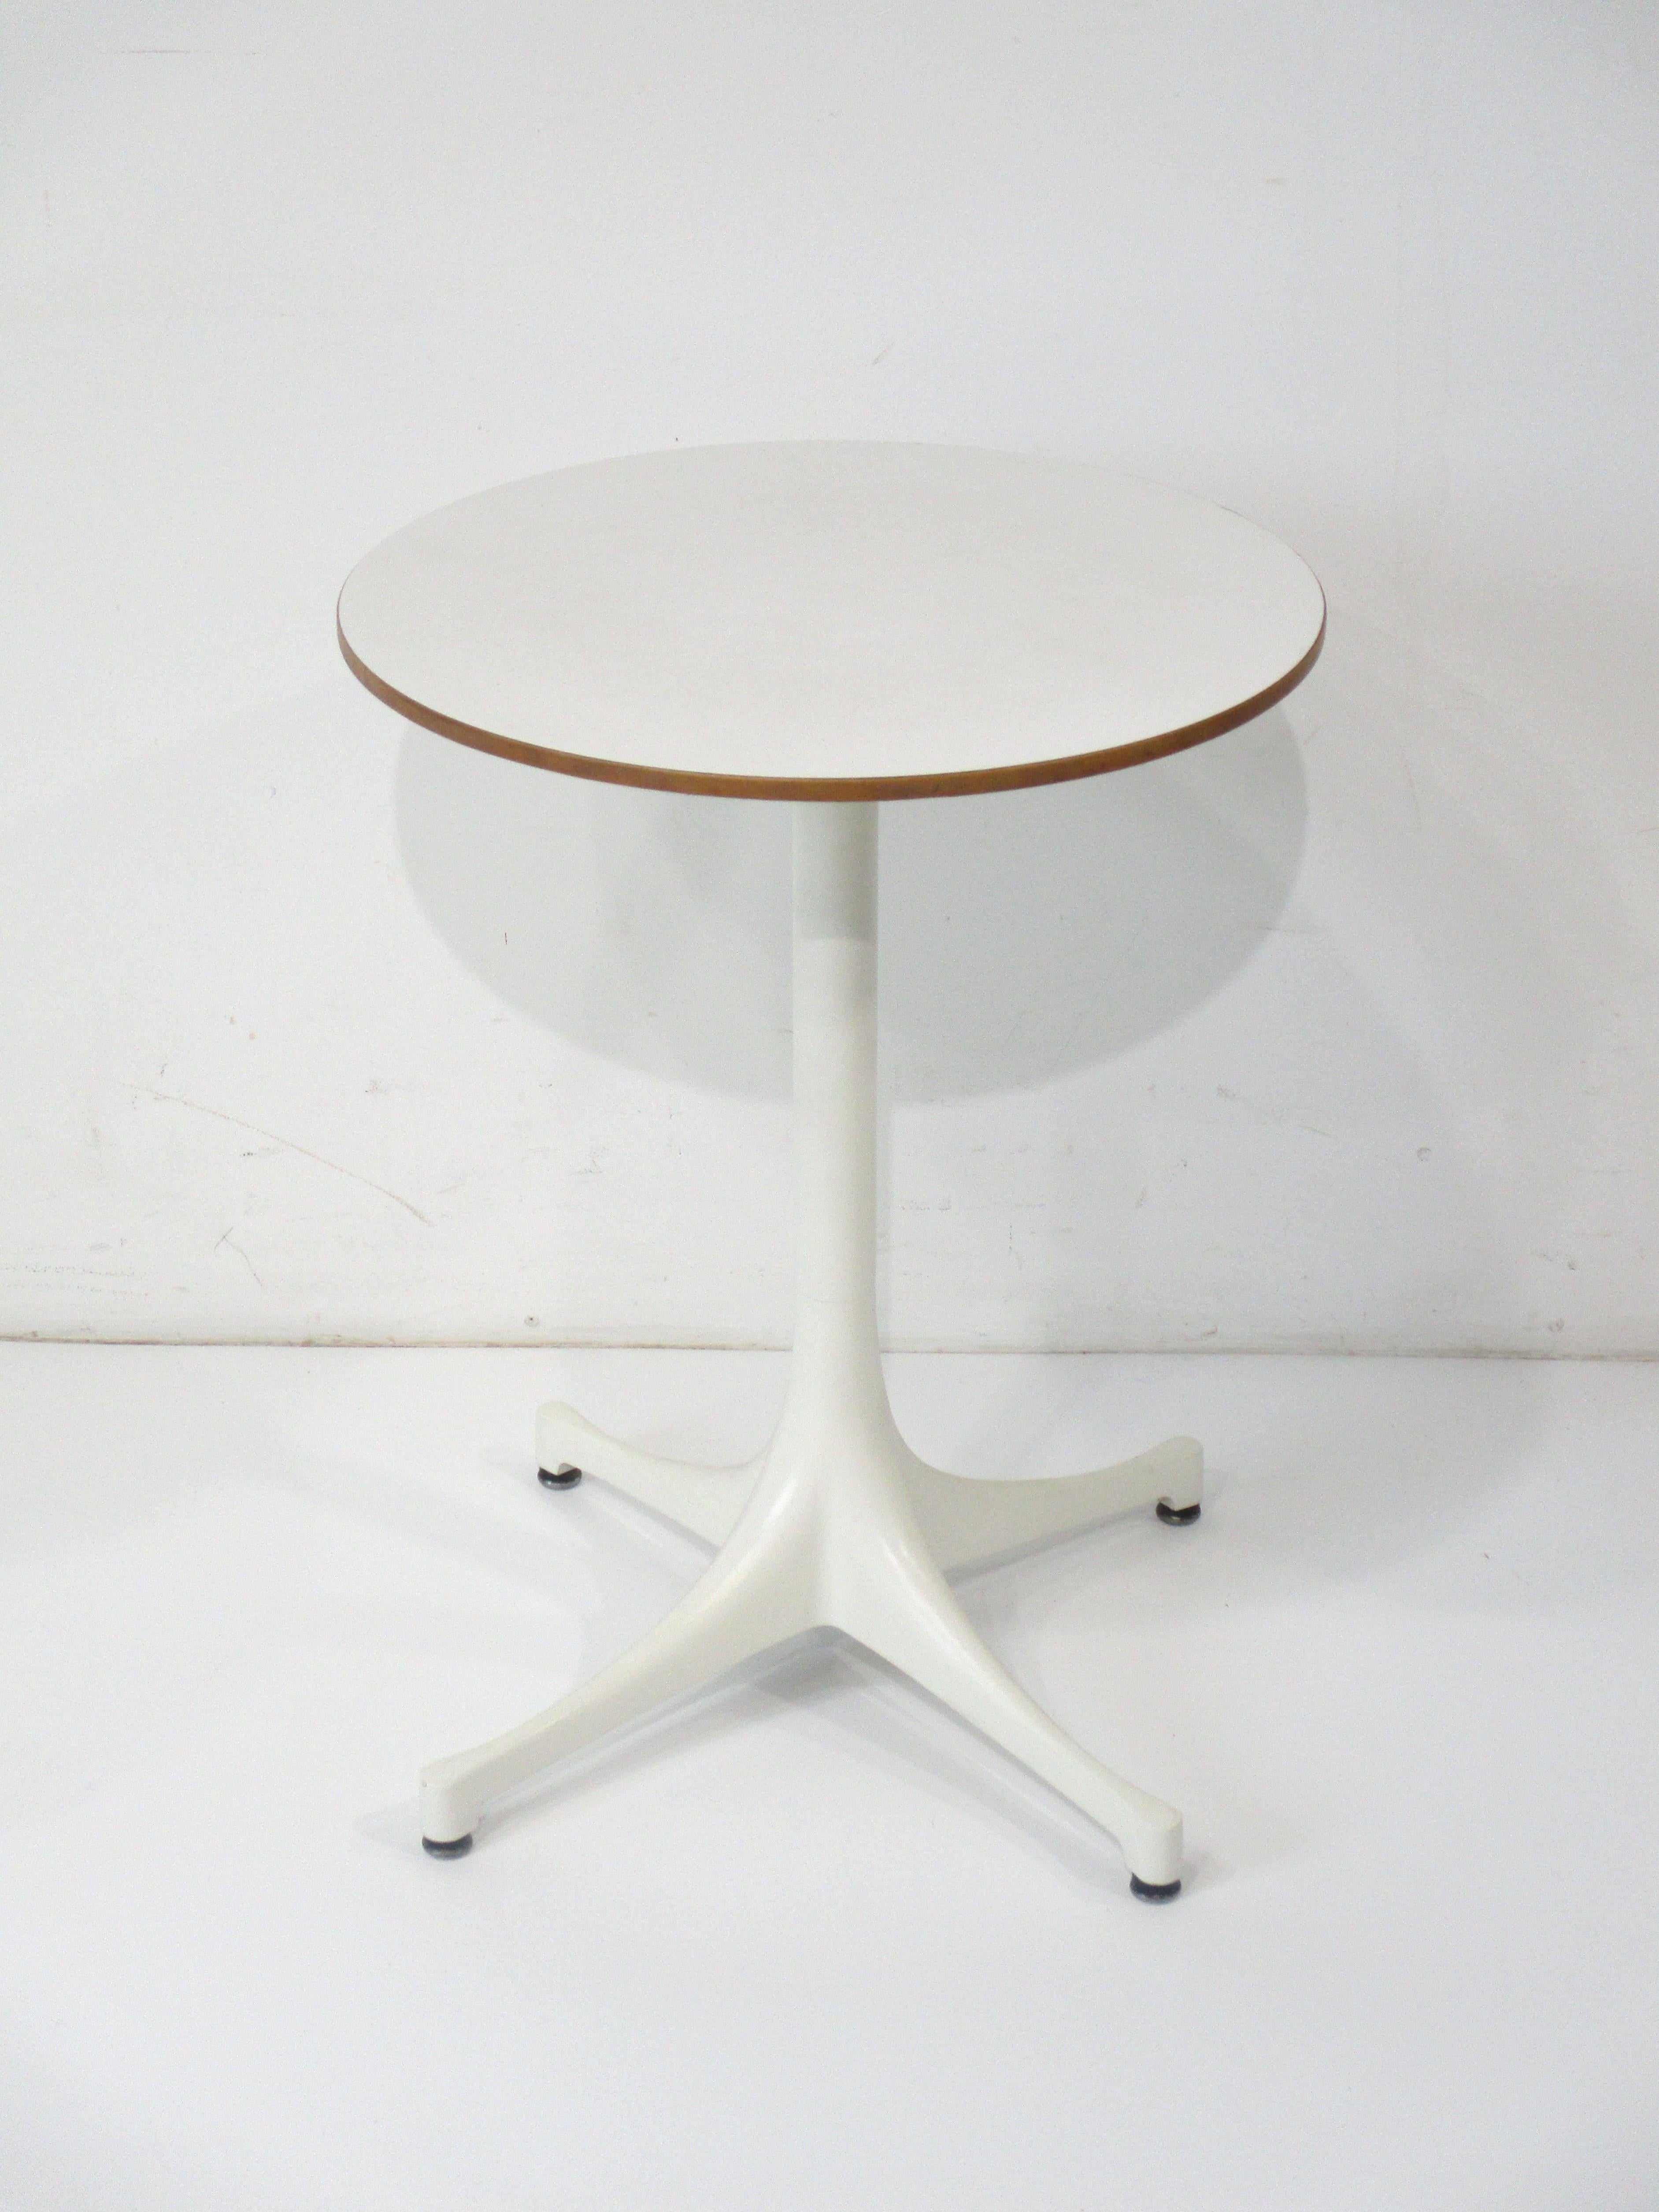 A simple and elegant pedestal side table with round top having a natural thin wood trim detail to the edge and cast meat star base . The base with foot pads to protect your floors has a top in white Lamanite , manufactured by the Herman Miller